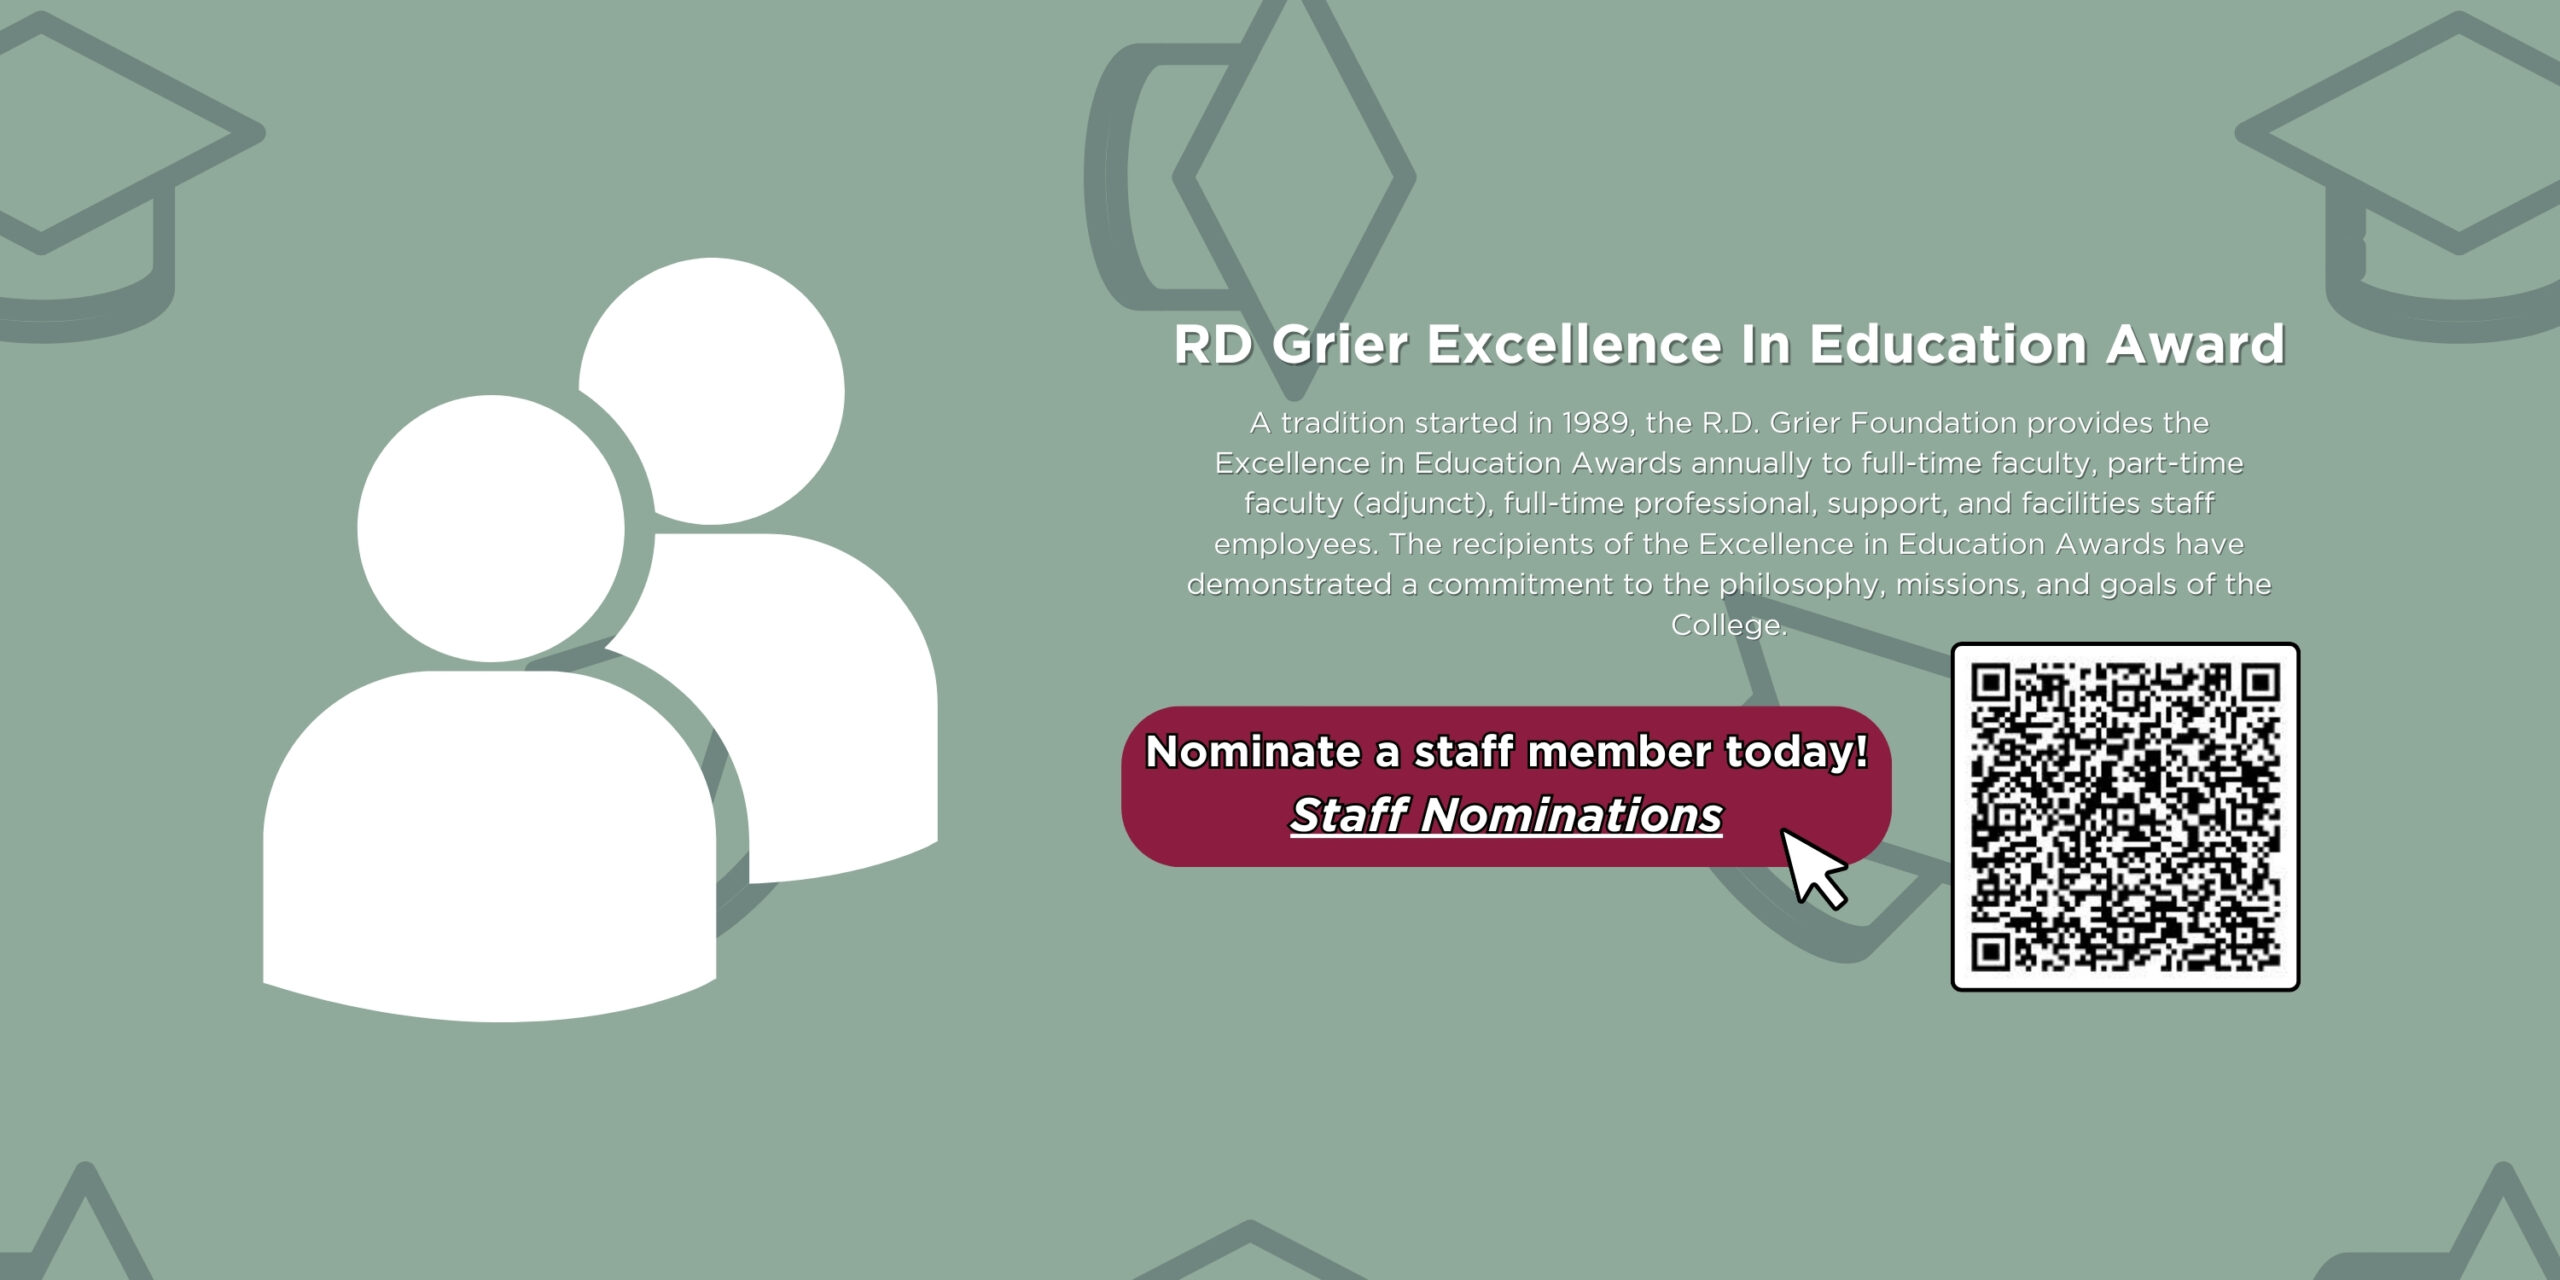 Slider that says "RD Grier Excellence In Education Award | A tradition started in 1989, the R.D. Grier Foundation provides the Excellence in Education Awards annually to full-time faculty, part-time faculty (adjunct), full-time professional, support, and facilities staff employees. The recipients of the Excellence in Education Awards have demonstrated a commitment to the philosophy, missions, and goals of the College. | Nominate a staff member today! Staff Nominations" Click the banner or scan the QR code to access the staff nomination form.